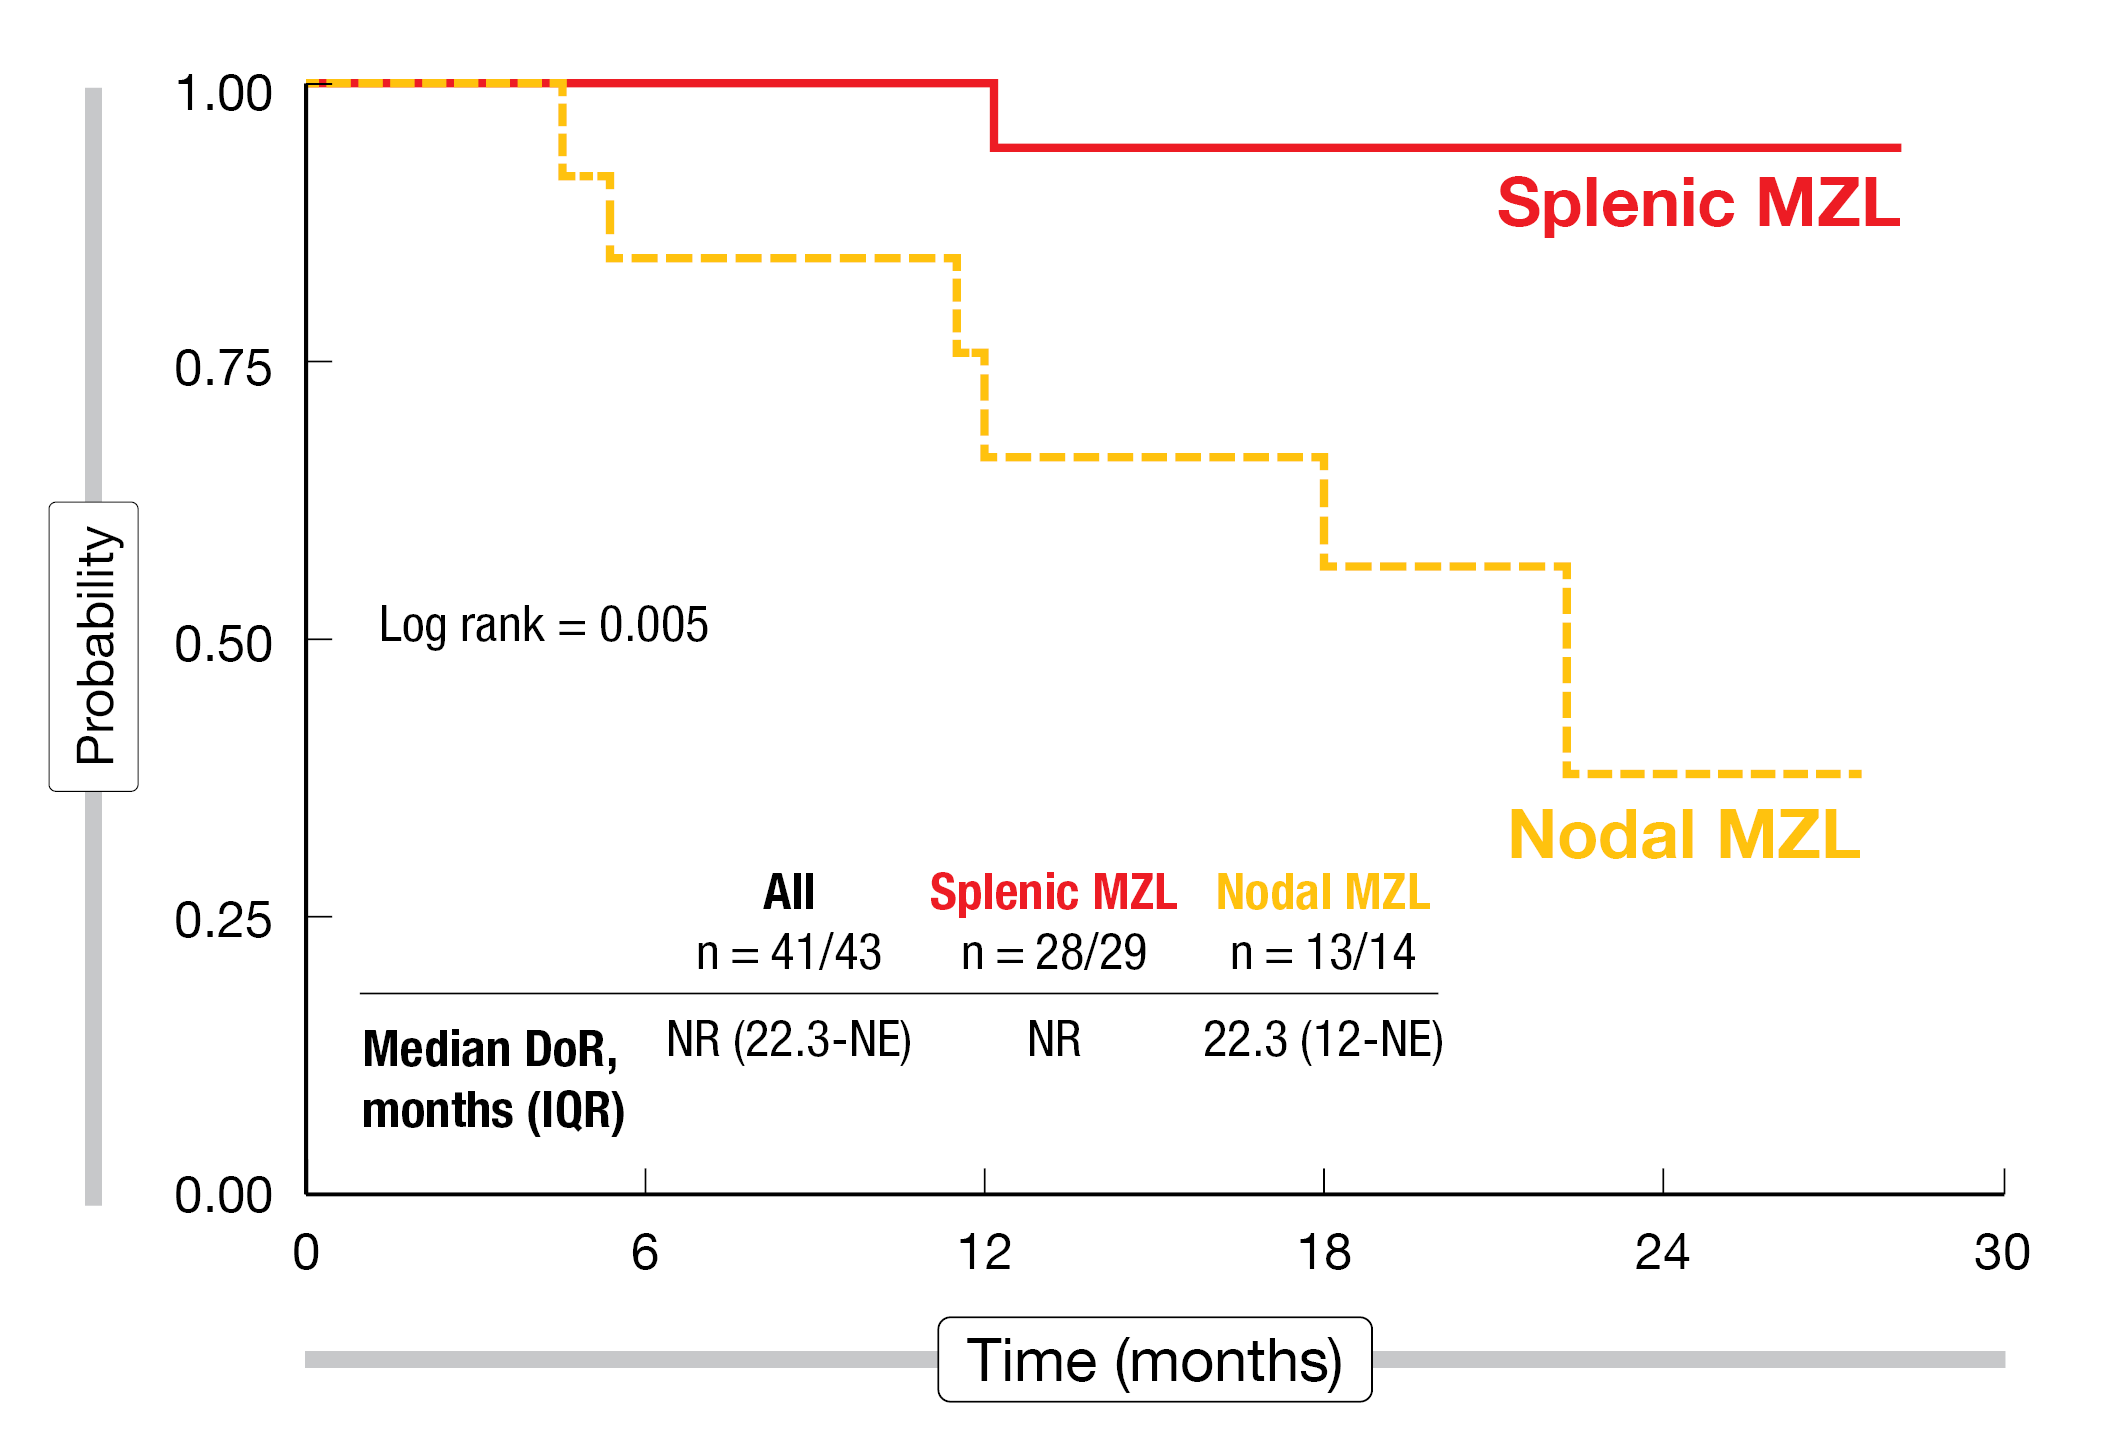 Figure 2: Duration of response observed with ibrutinib plus rituximab in patients with splenic and nodal marginal zone lymphoma